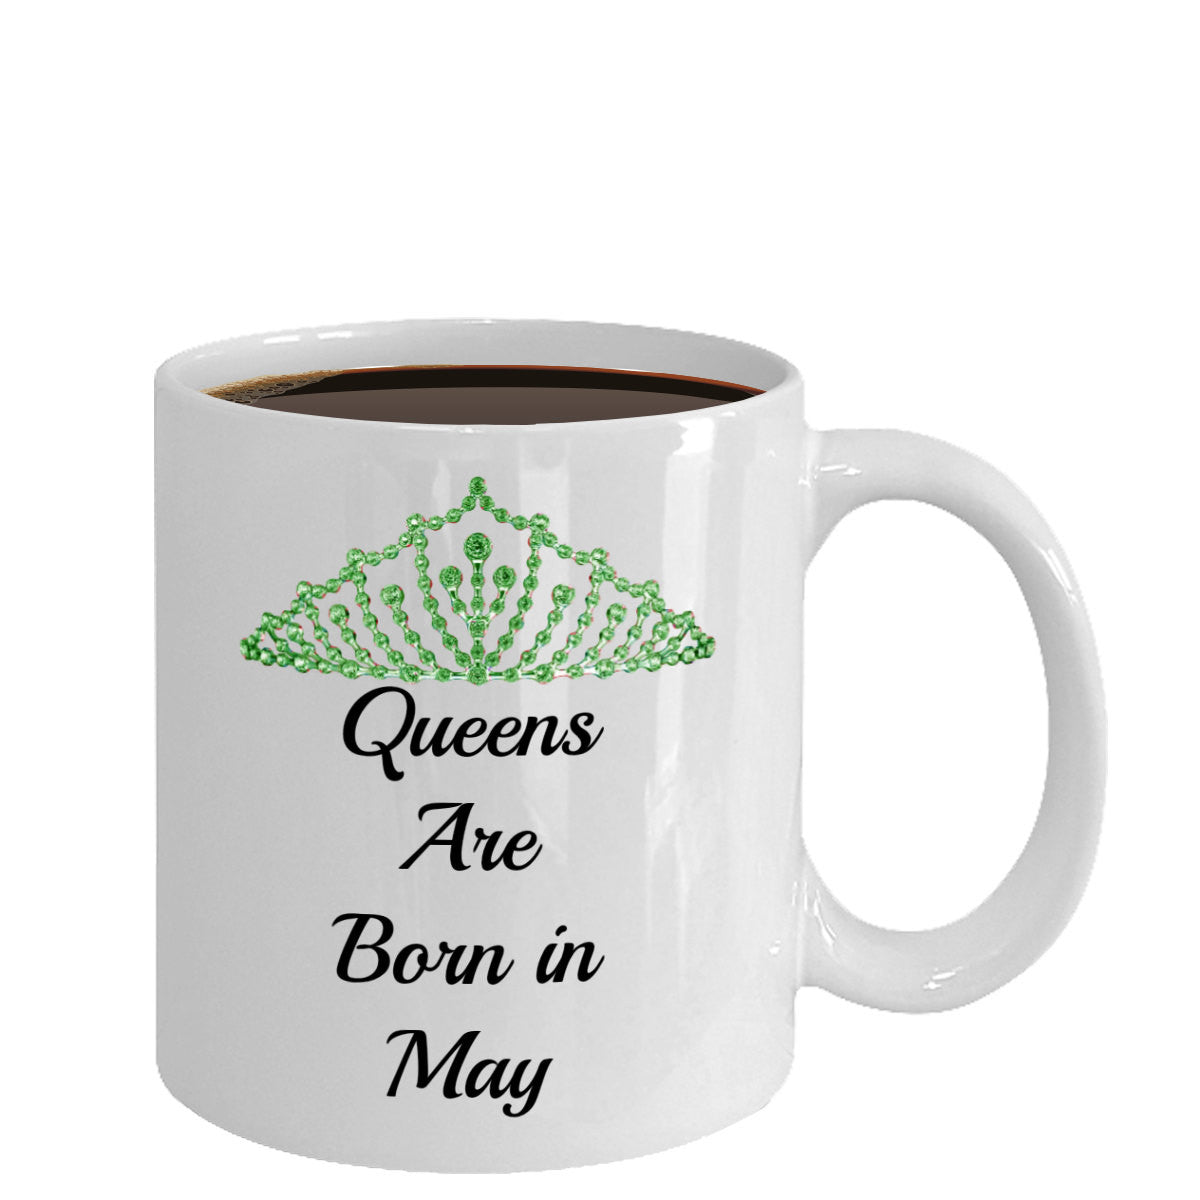 Queens Are Born In May- Novelty Coffee Mug -May Birthday Mothers Day Gift Mug White Ceramic Cup